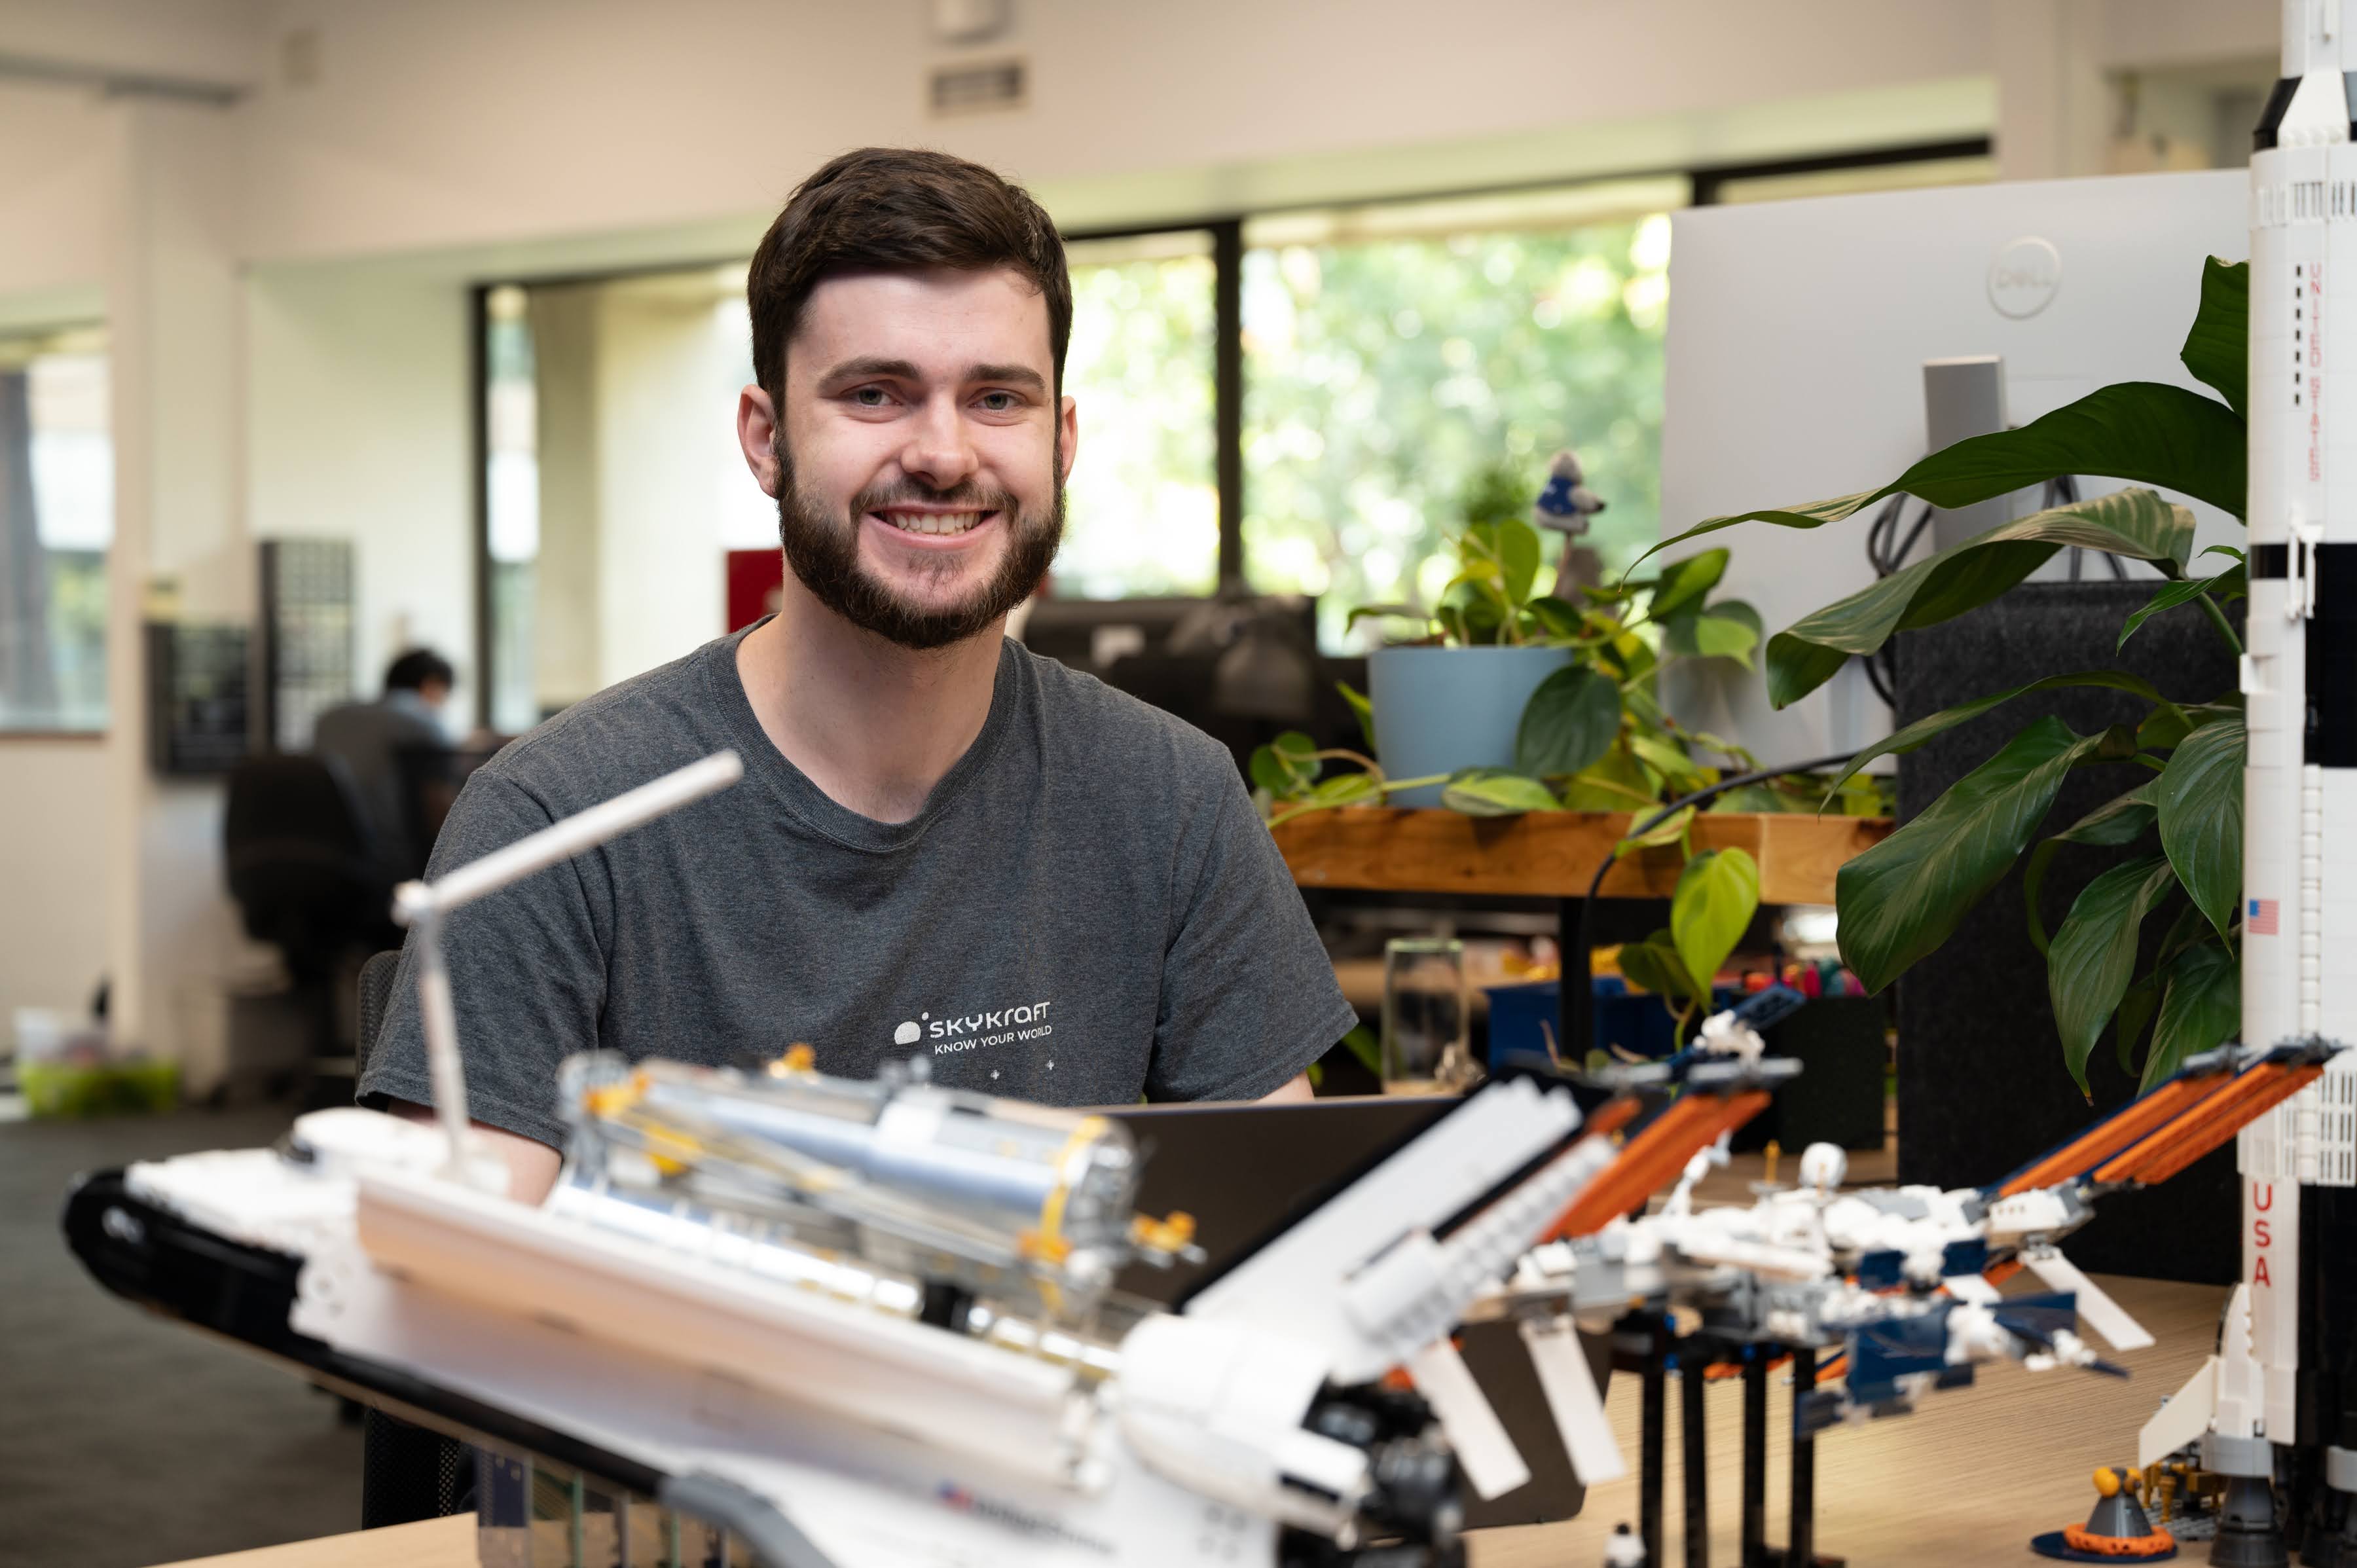 Andrew Gibbs completed his Electrical Engineering degree in 2020 and is now working at UNSW Canberra spinoff space company, Skykraft.